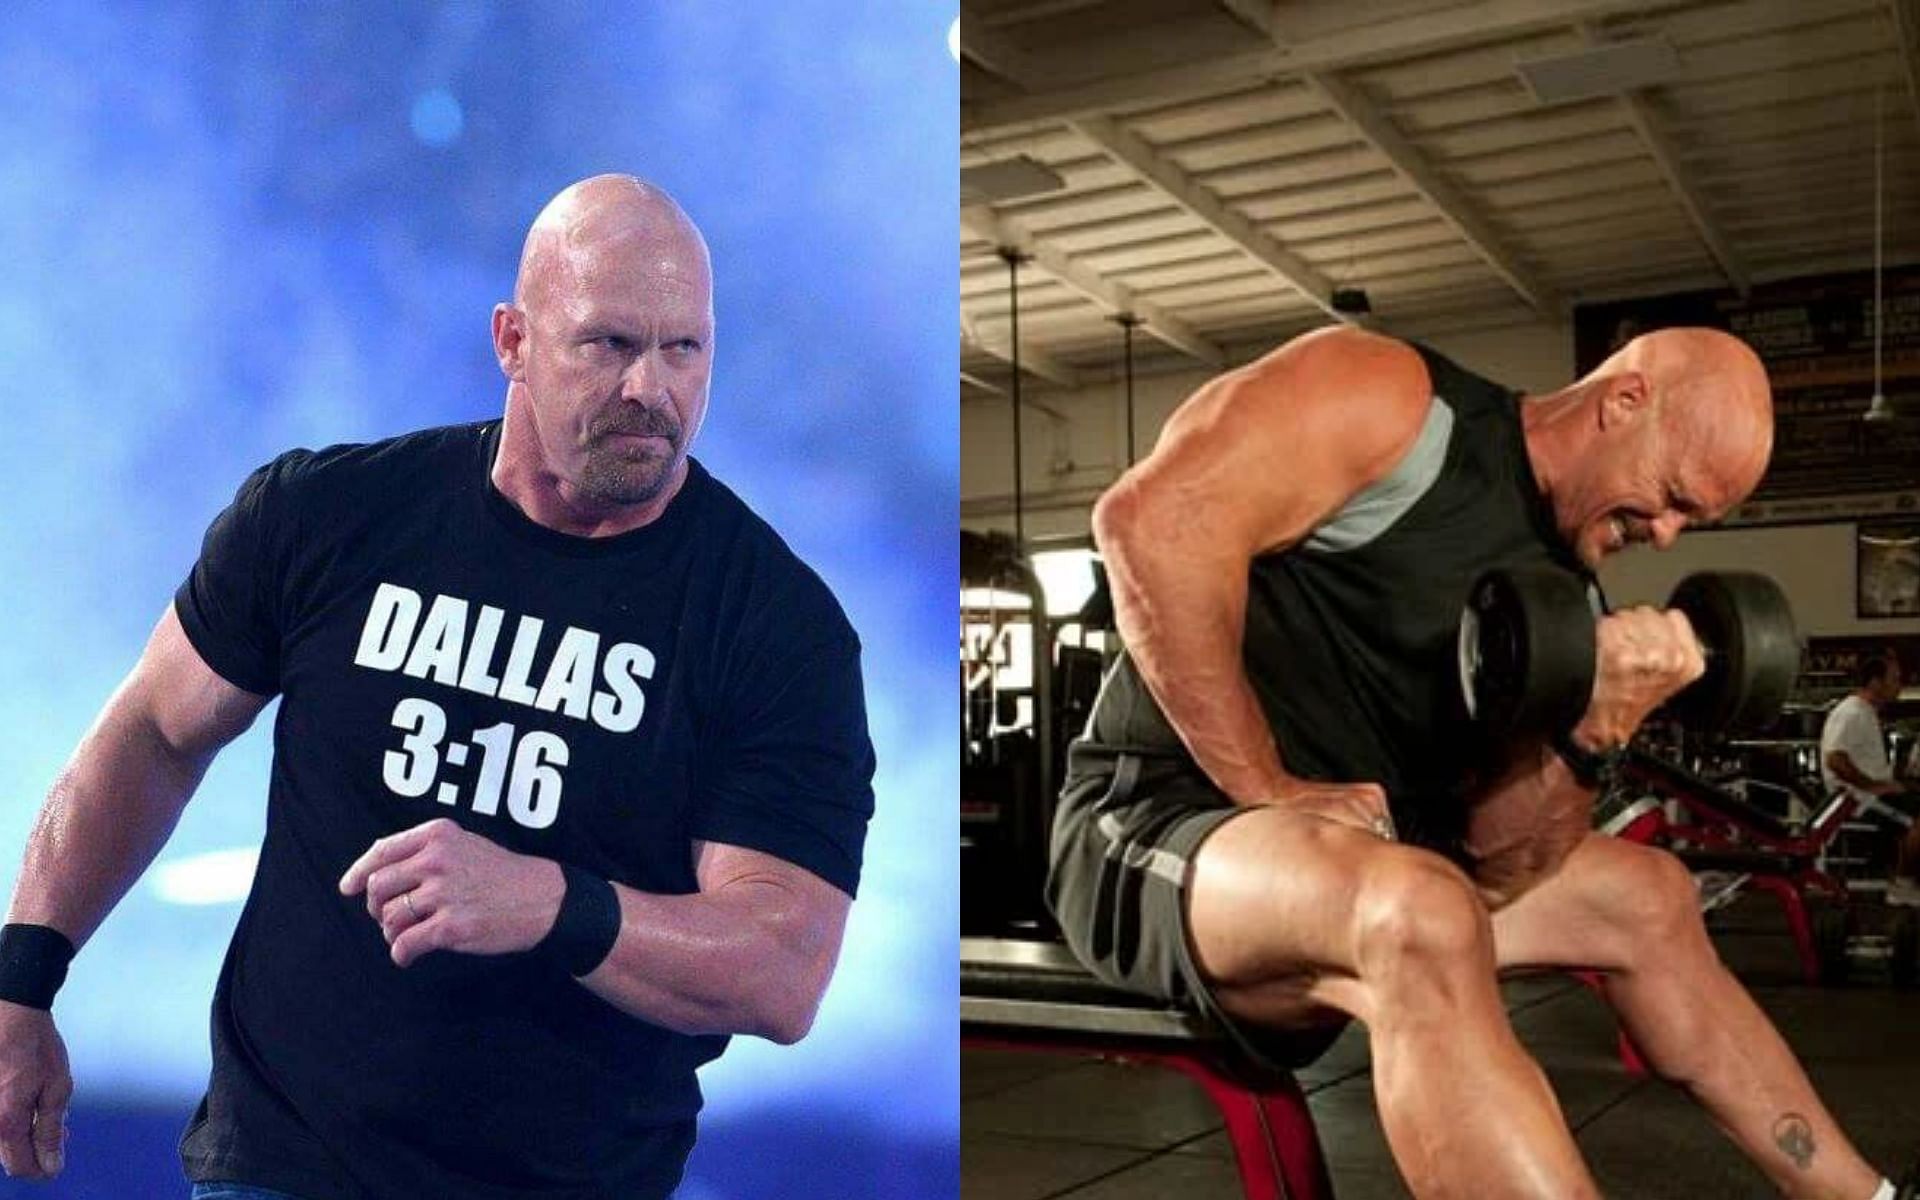 Stone Cold might be back in a WWE ring at some point in the future